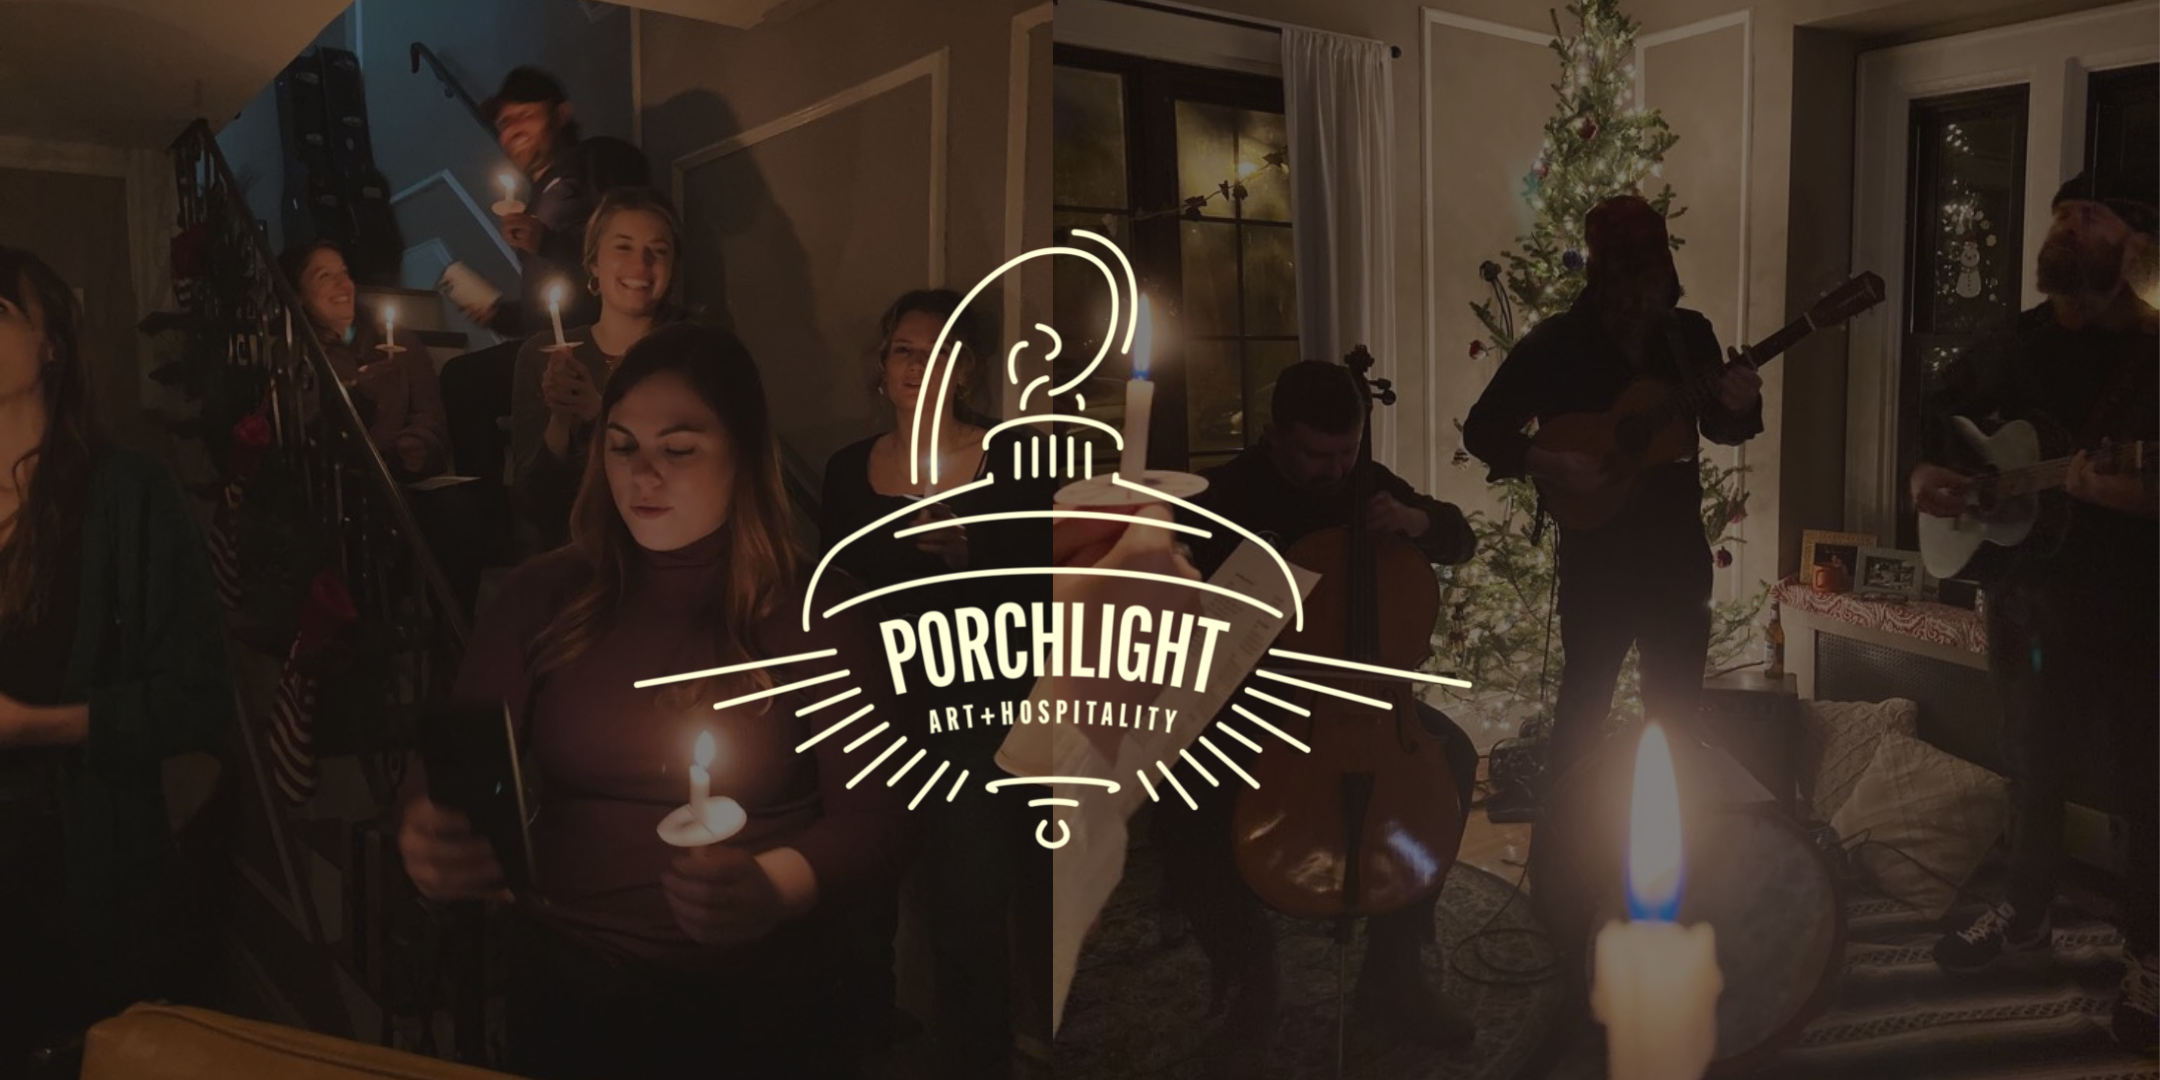 Porchlight Art + Hospitality logo over two images from 2021 Christmas Concert